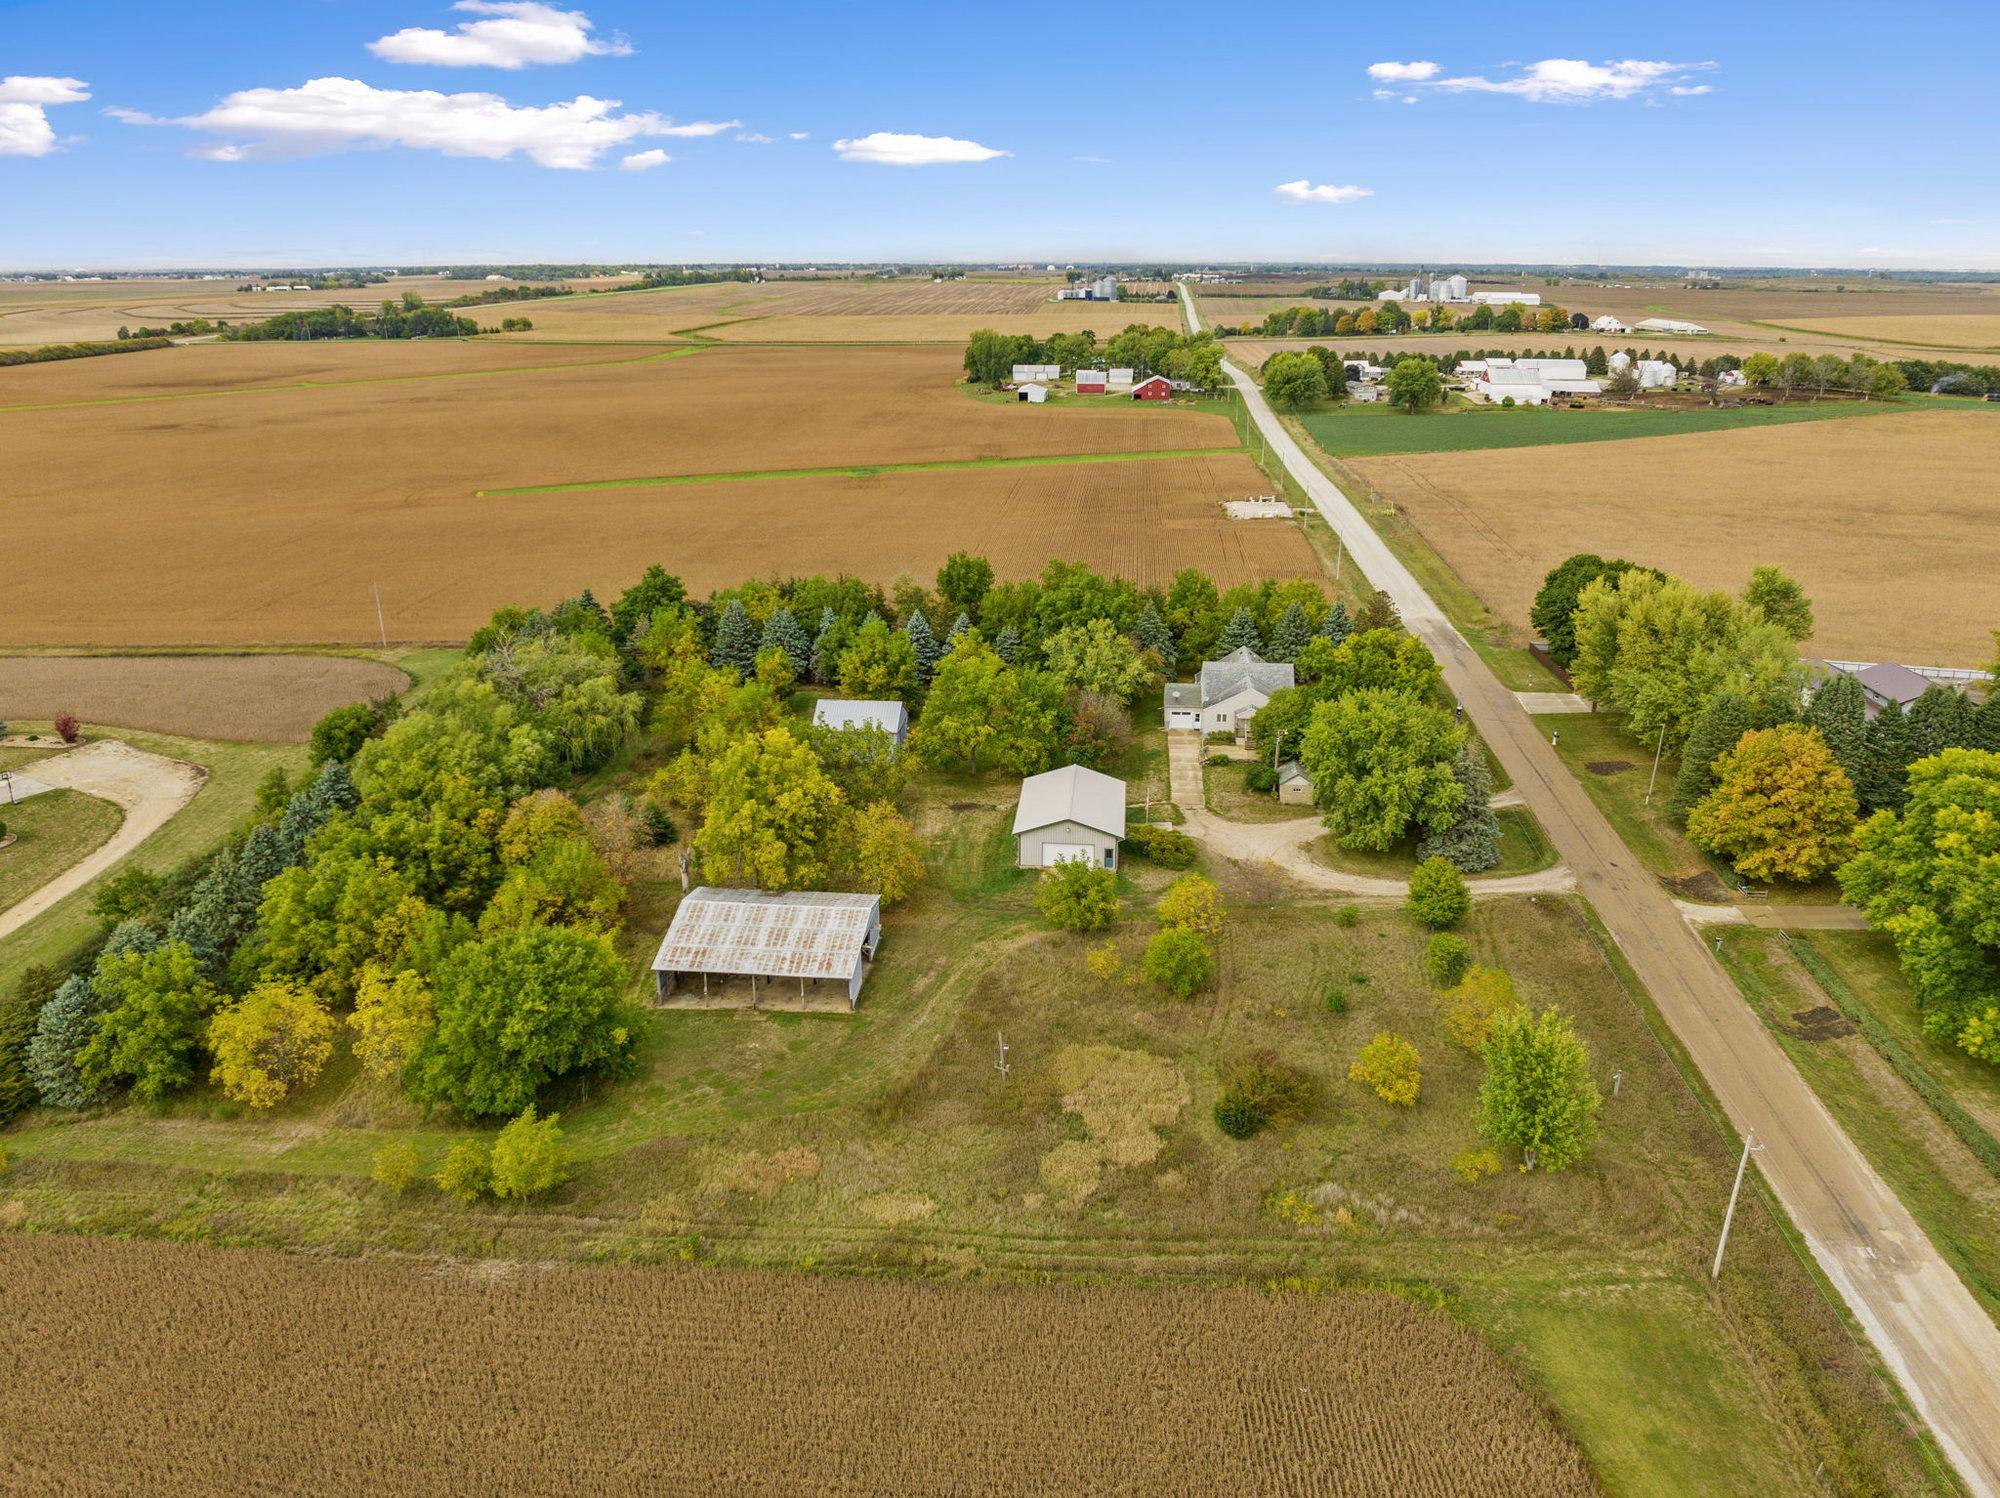 Check out this Spacious Acreage for Sale Just South of Waterloo | Oakridge Real Estate